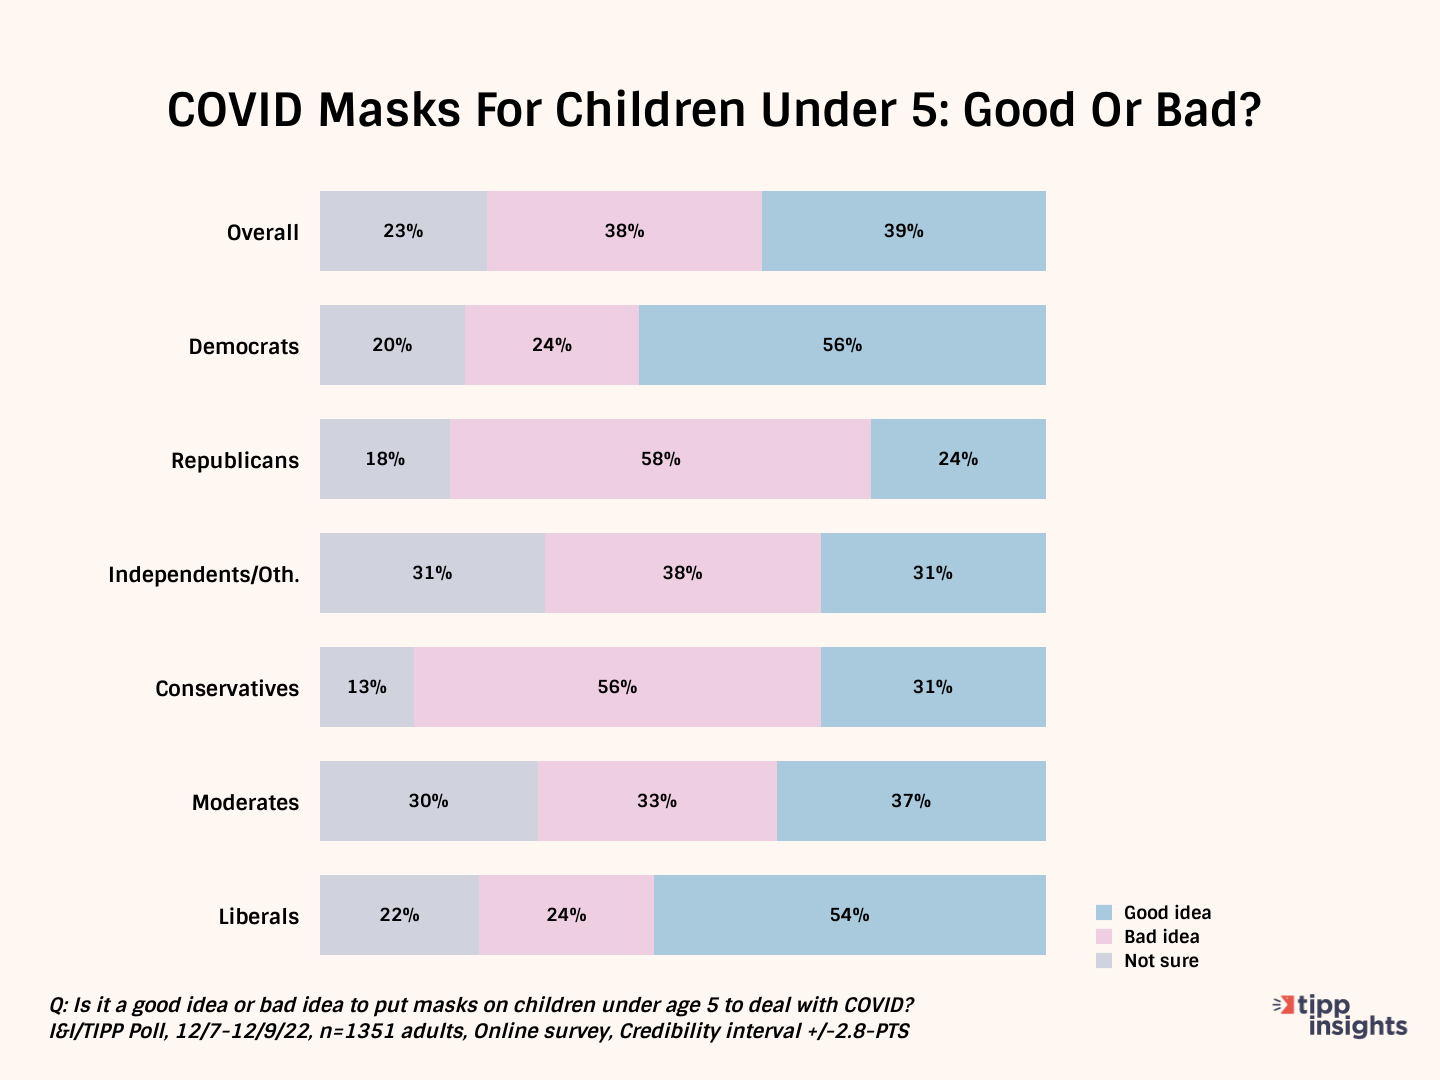 Should We Mask Kids Under 5 To Contain COVID? — I&I/TIPP Poll